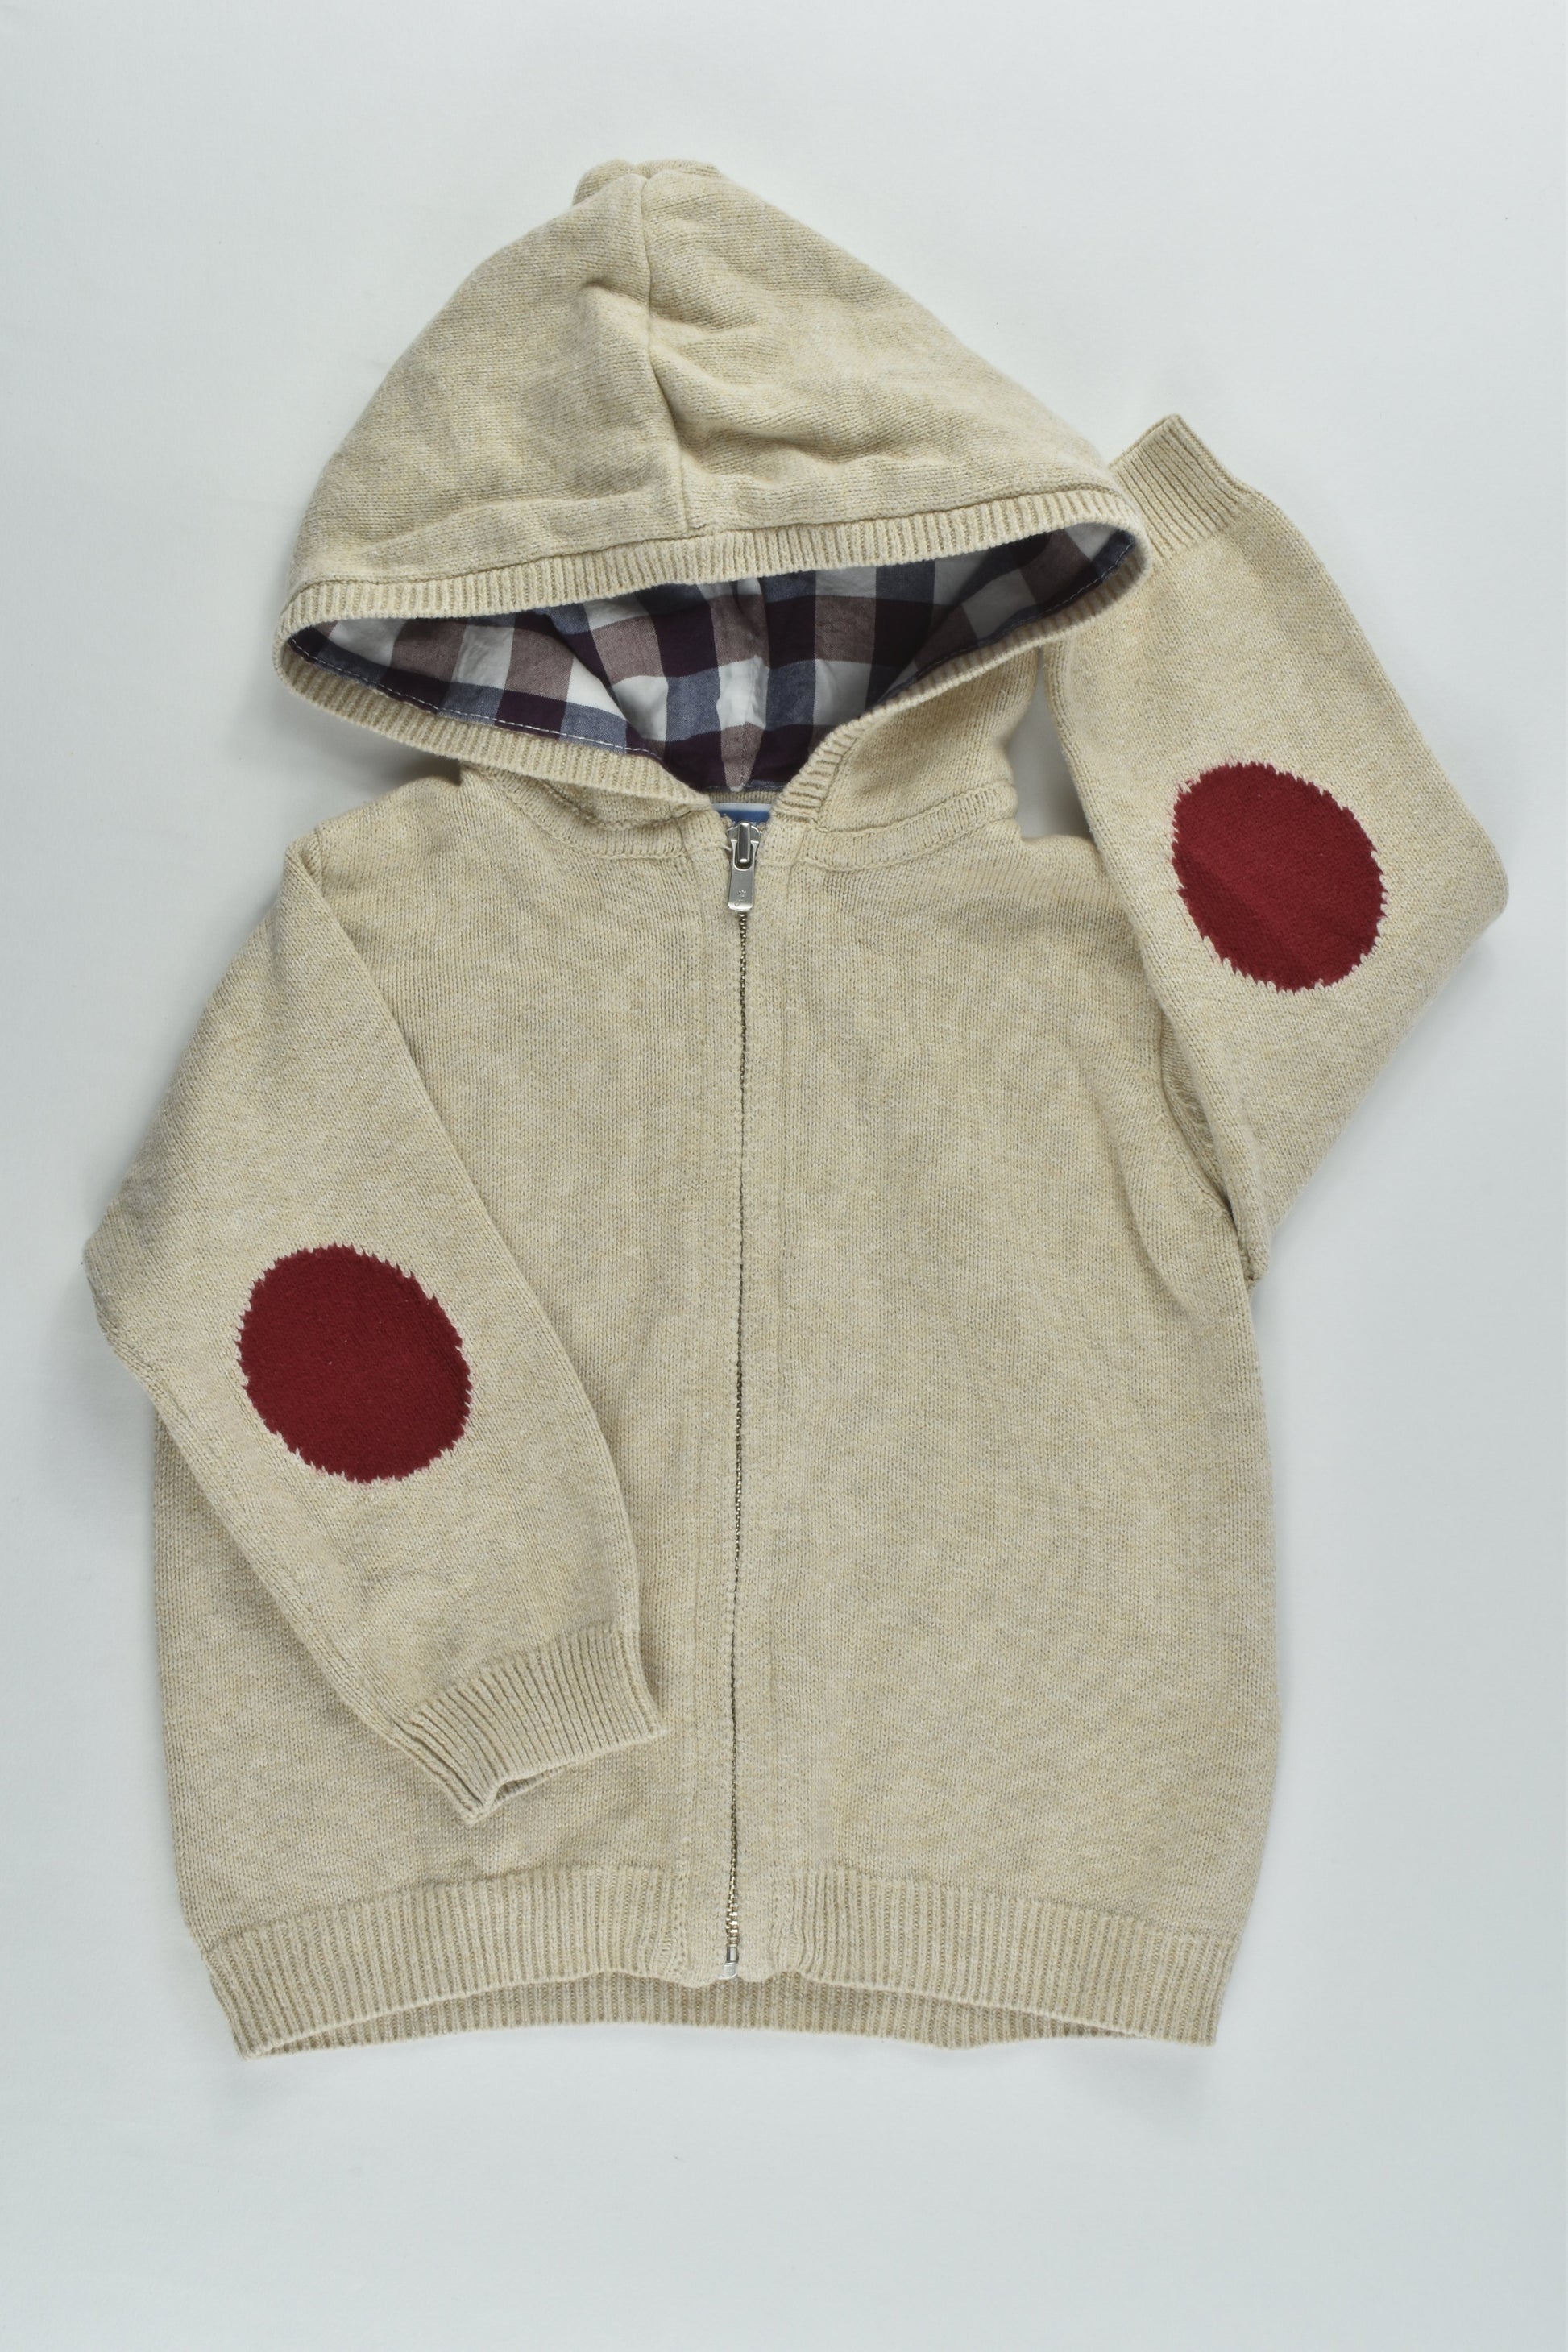 Jacadi (Paris) Size 0 (12 months, 74 cm) Knitted Hooded Jumper